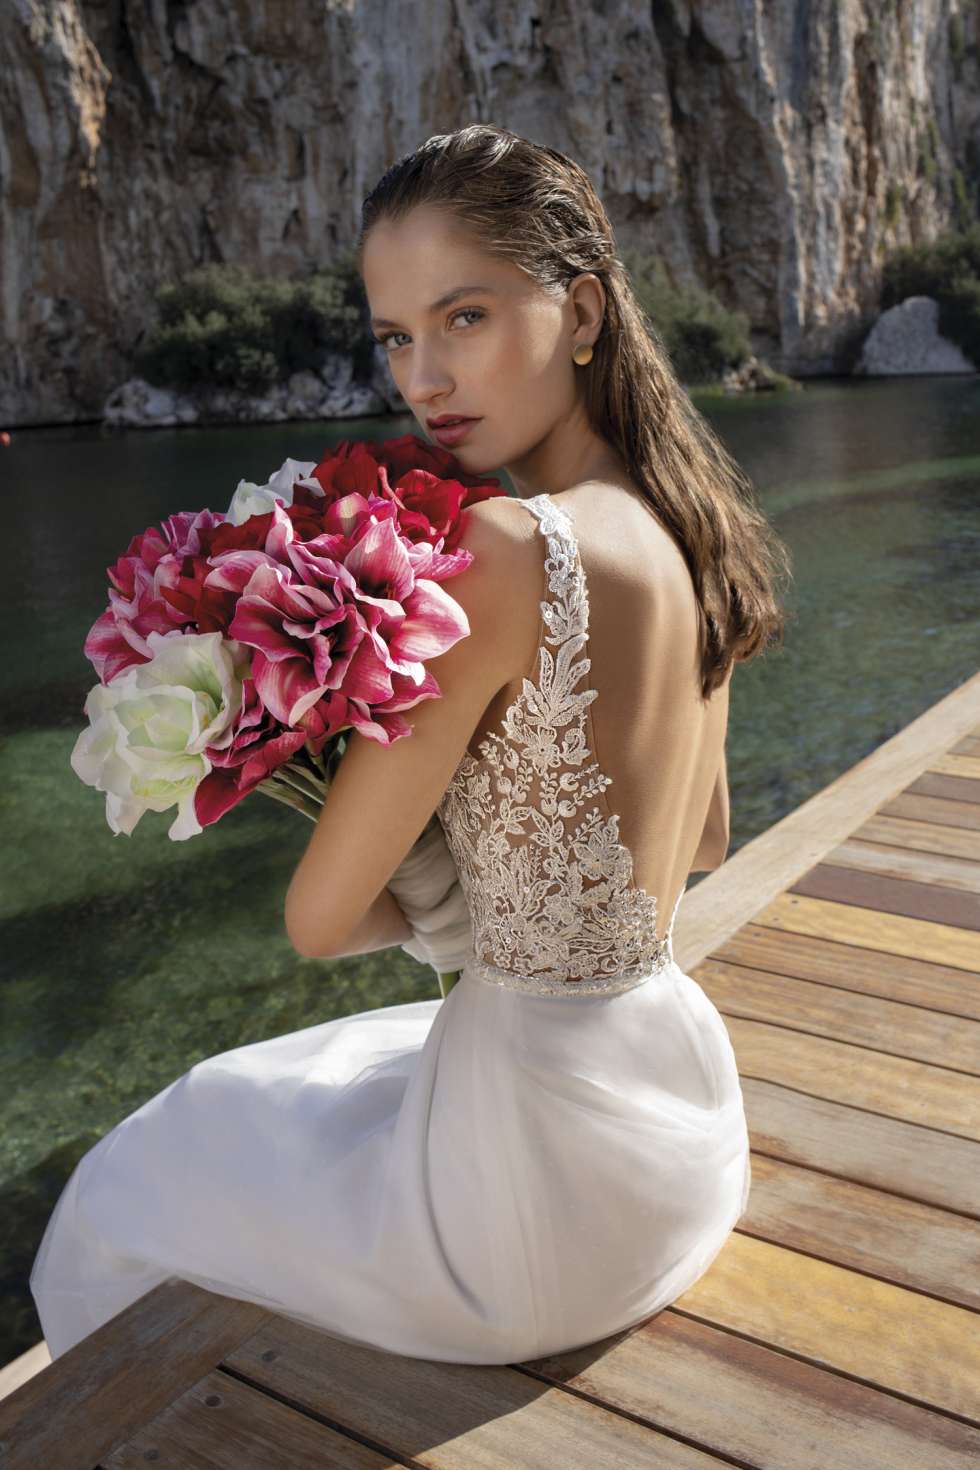 The Forget Me Not Bridal Collection by Demetrios for 2020